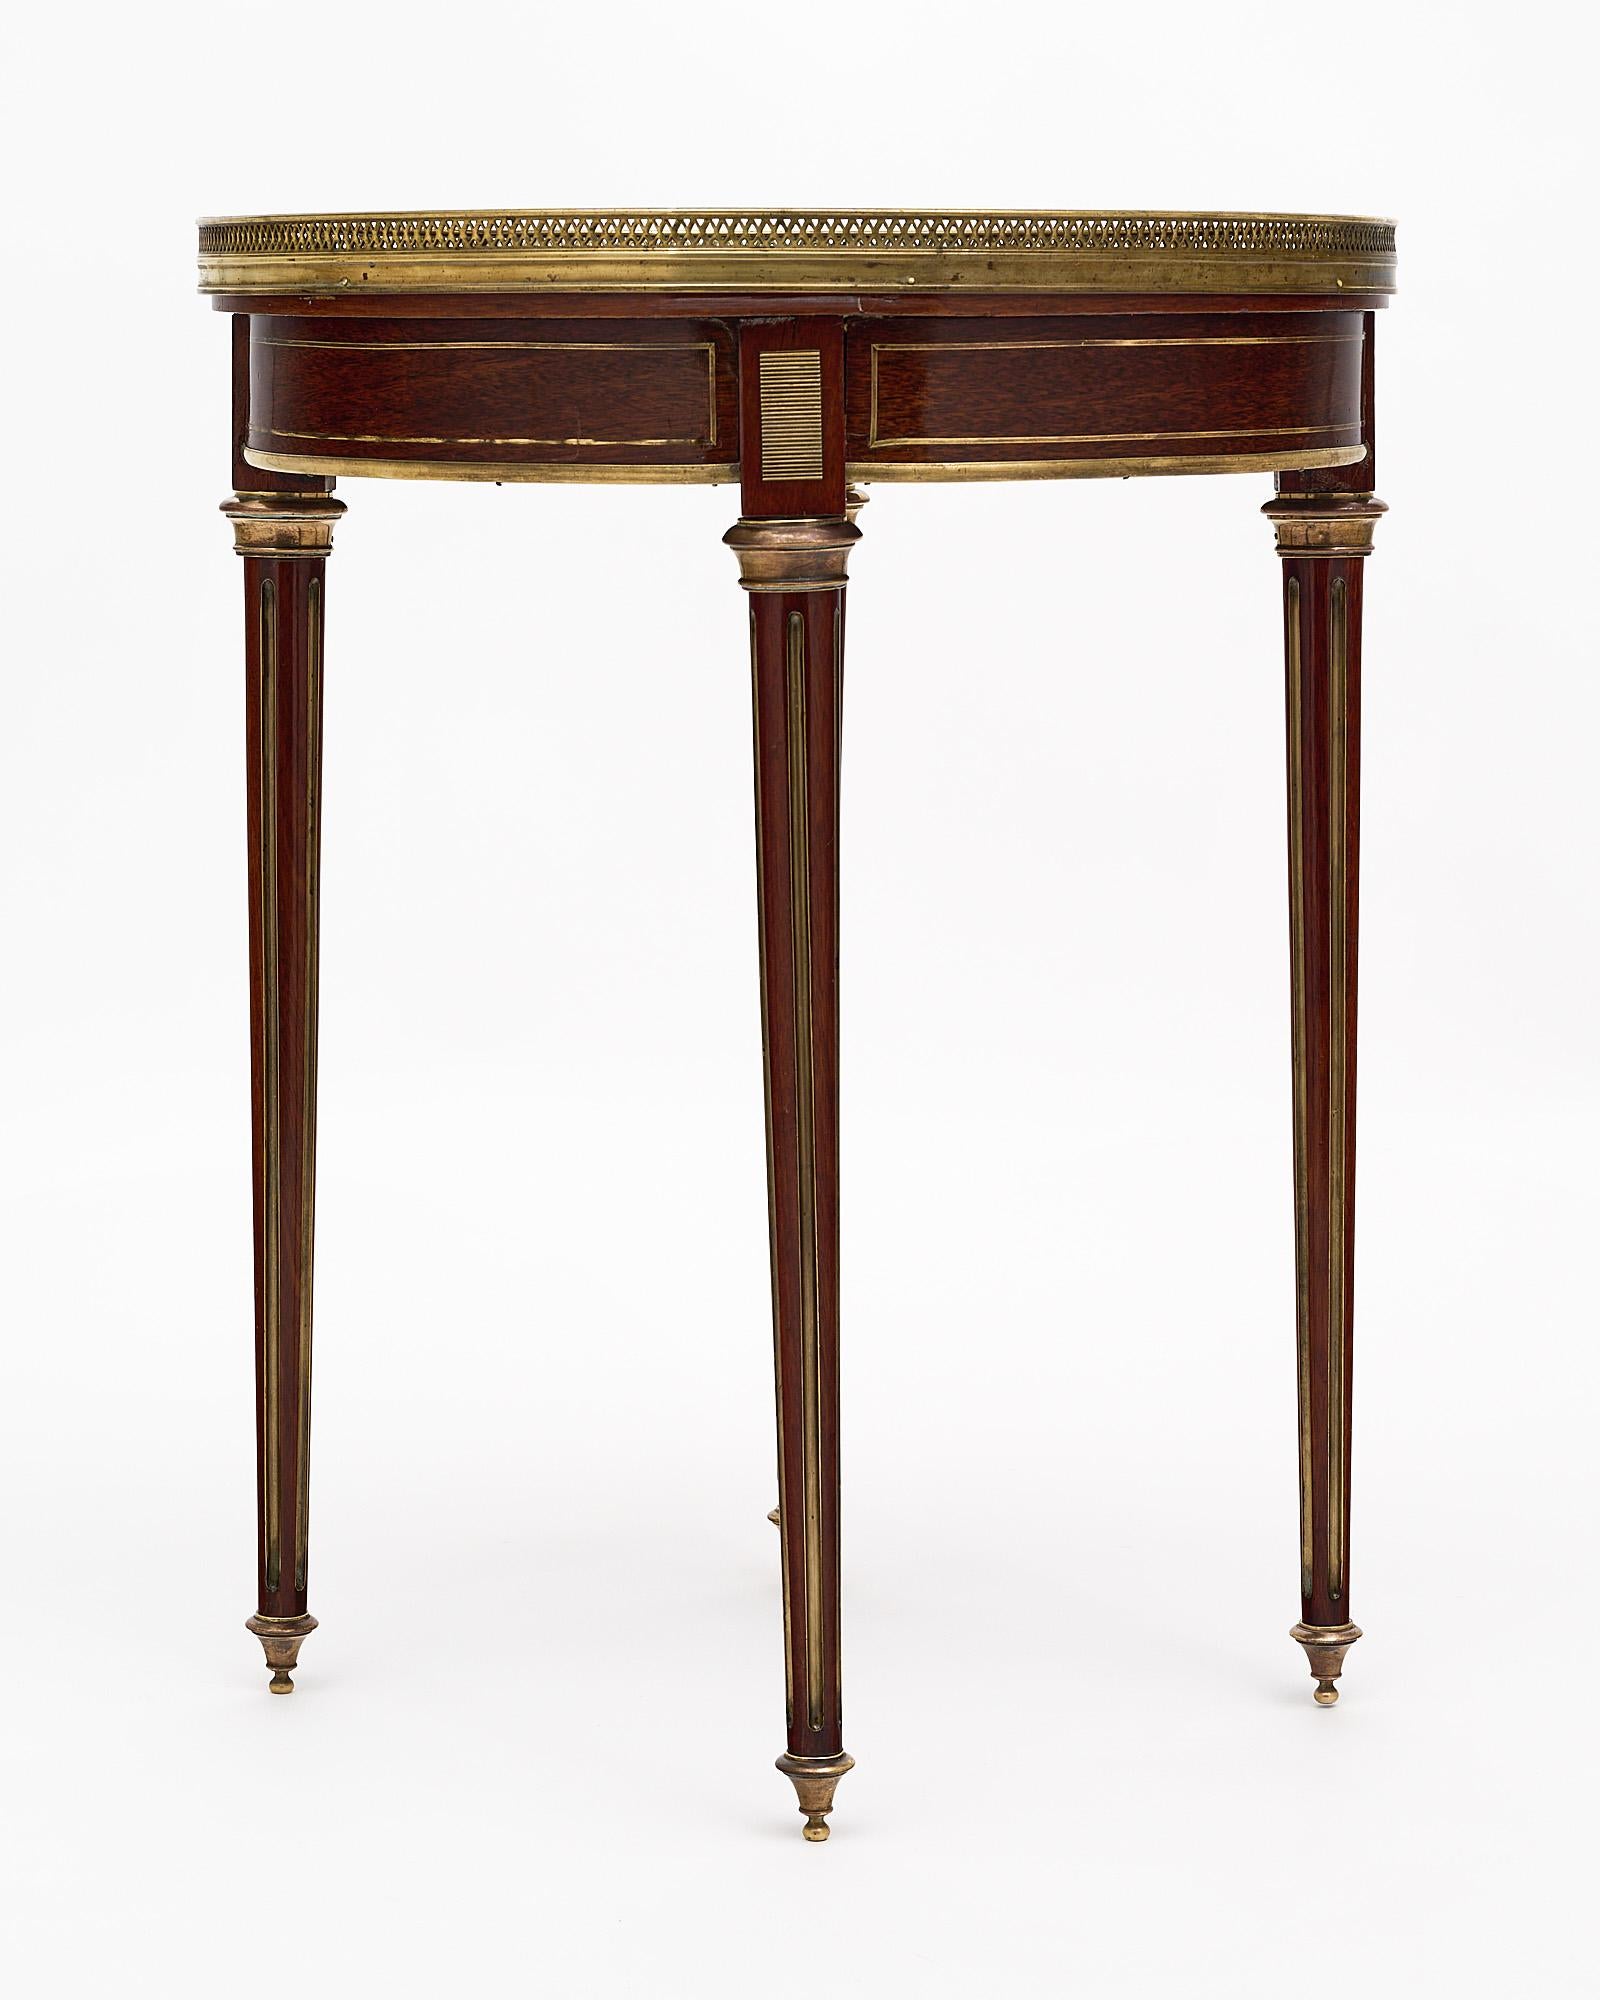 Side “bouillotte table”, French made of mahogany that has been finished in a lustrous French polish. The top is an intact “Breche royal” marble surrounded by brass. This table also features brass “toupie” feet and gilt brass fluting.